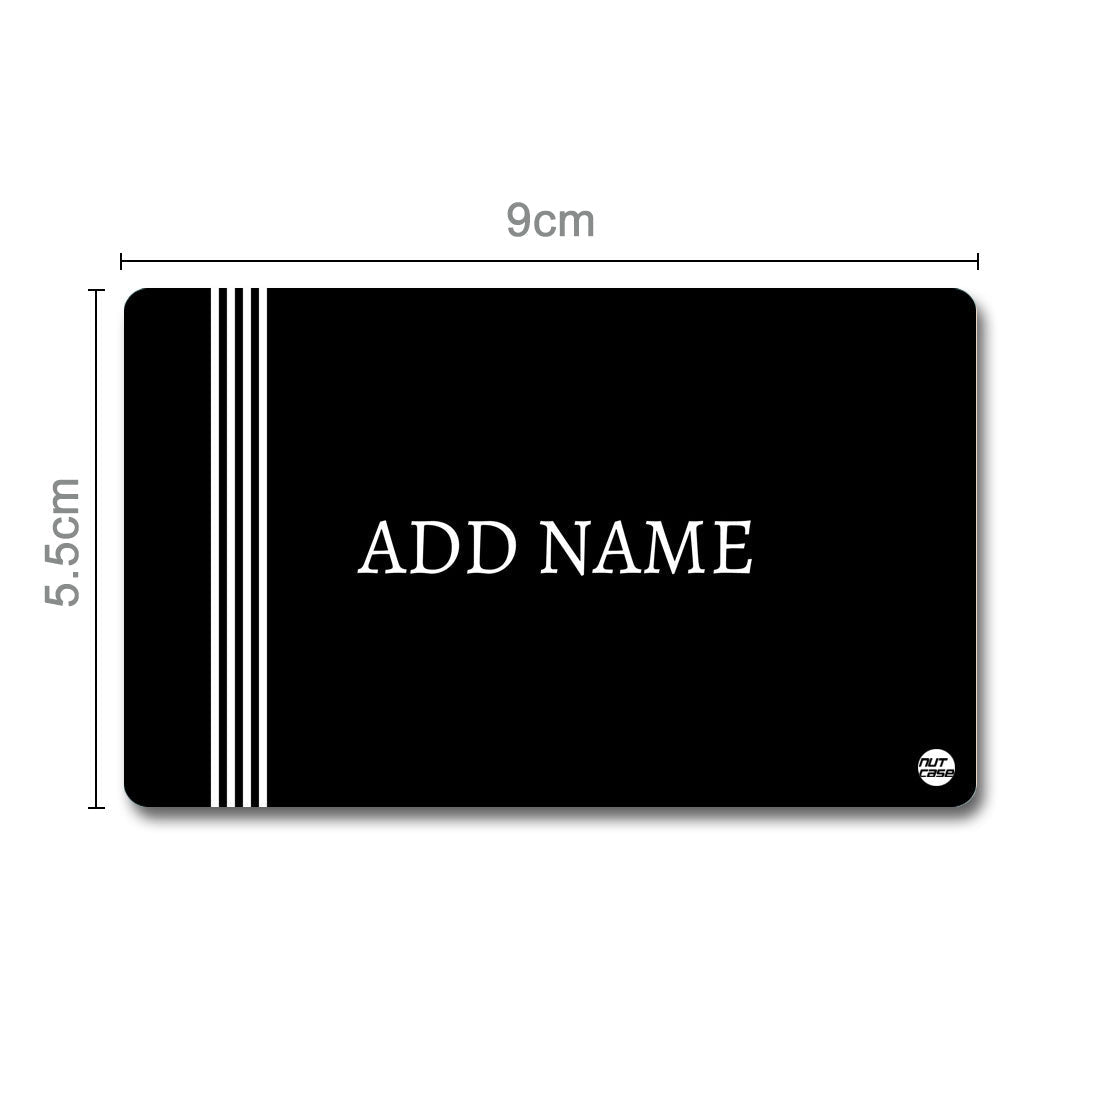 Custom NFC Cards Business Smart Card  - Minimal Black ( For Android Phones Only)